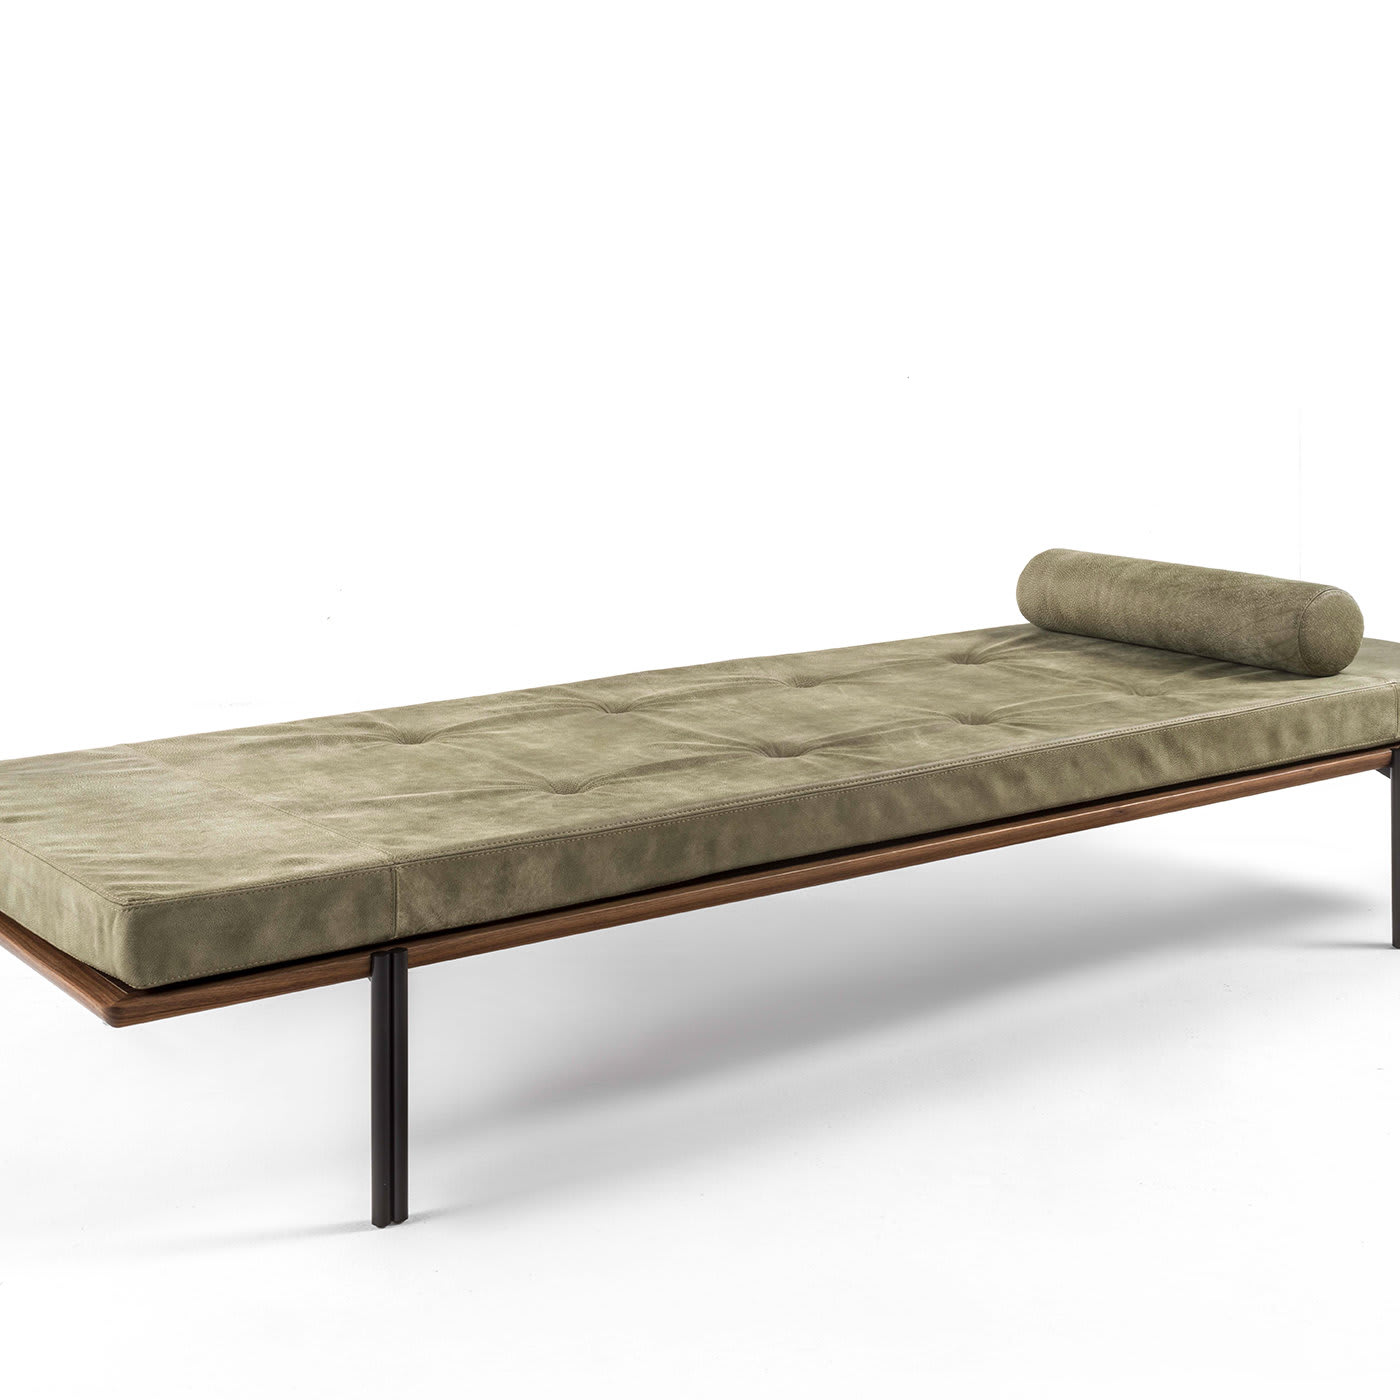 Jean daybed - Durame